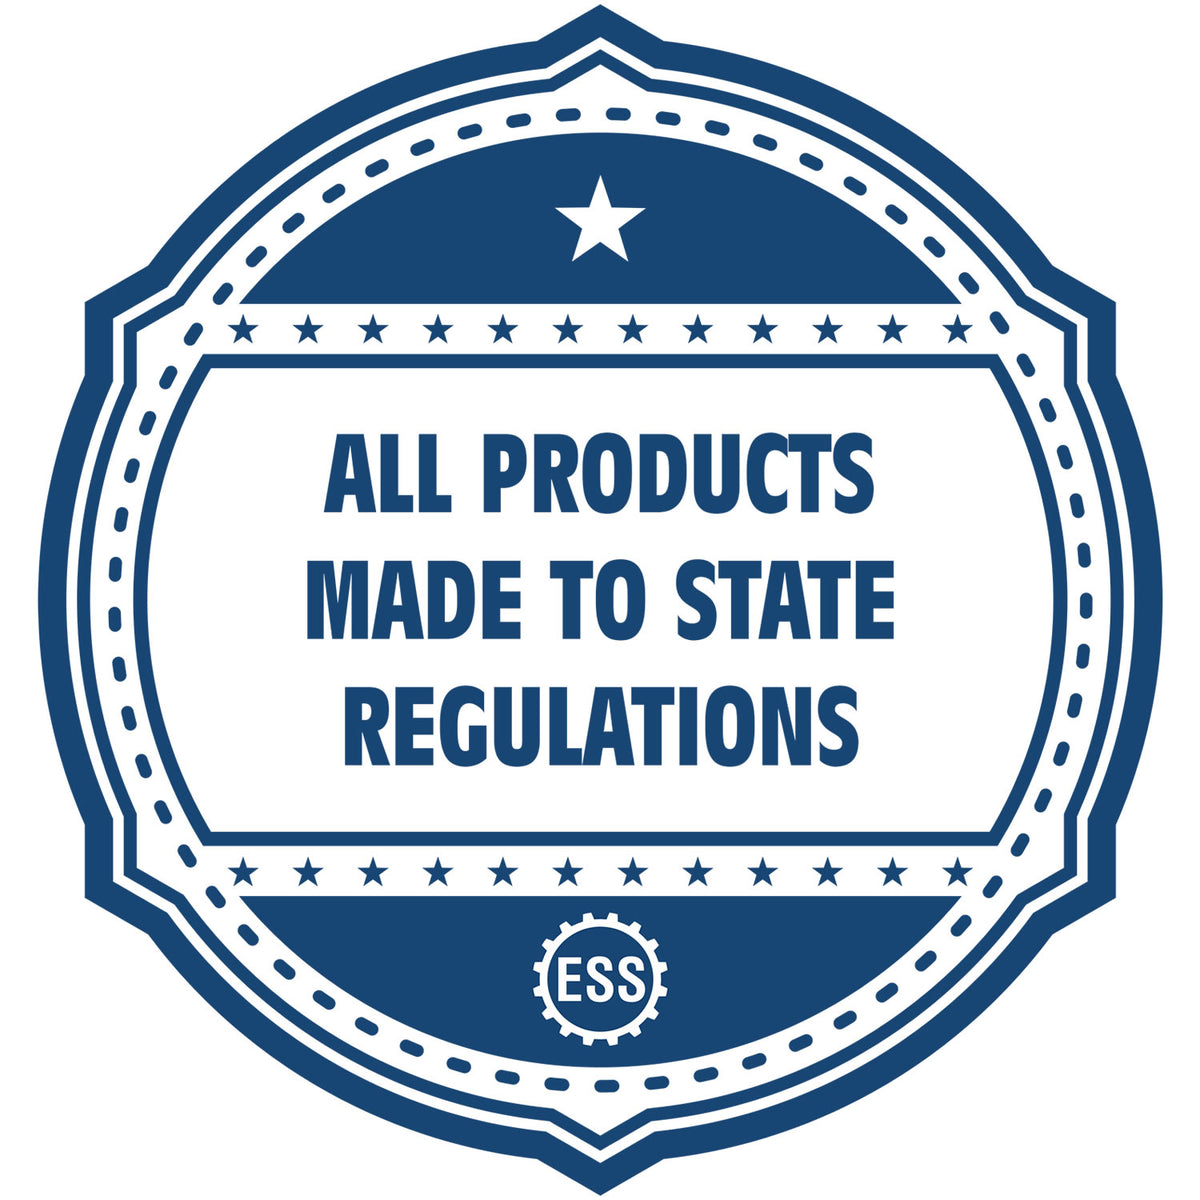 An icon or badge element for the PSI North Dakota Notary Stamp showing that this product is made in compliance with state regulations.